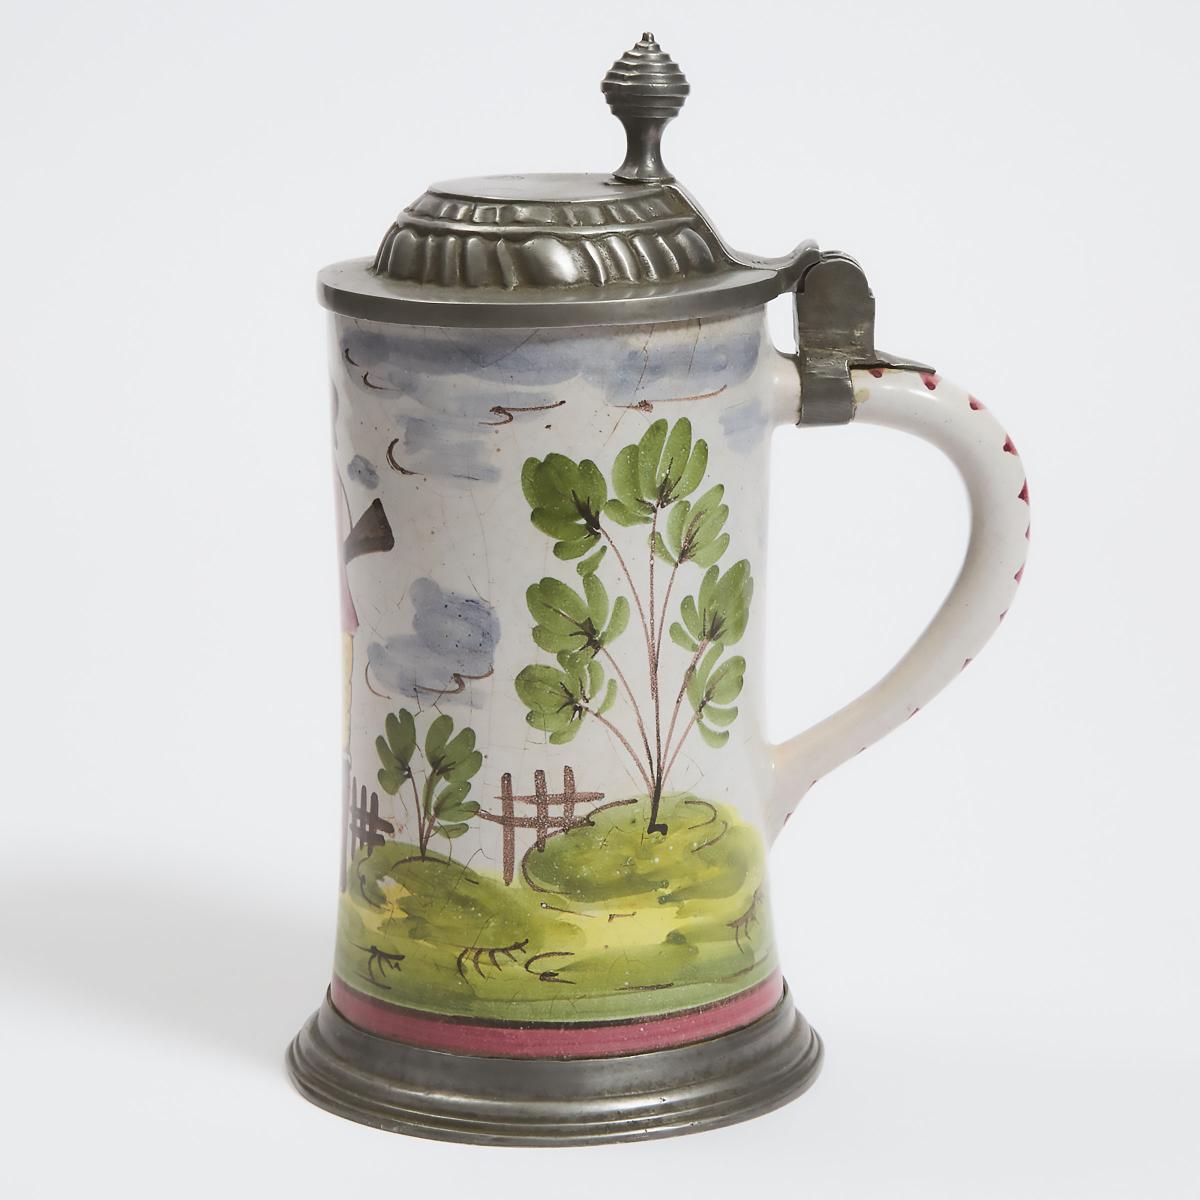 German Pewter Mounted Delft Pottery Stein, 19th century, height 10 in — 25.4 cm